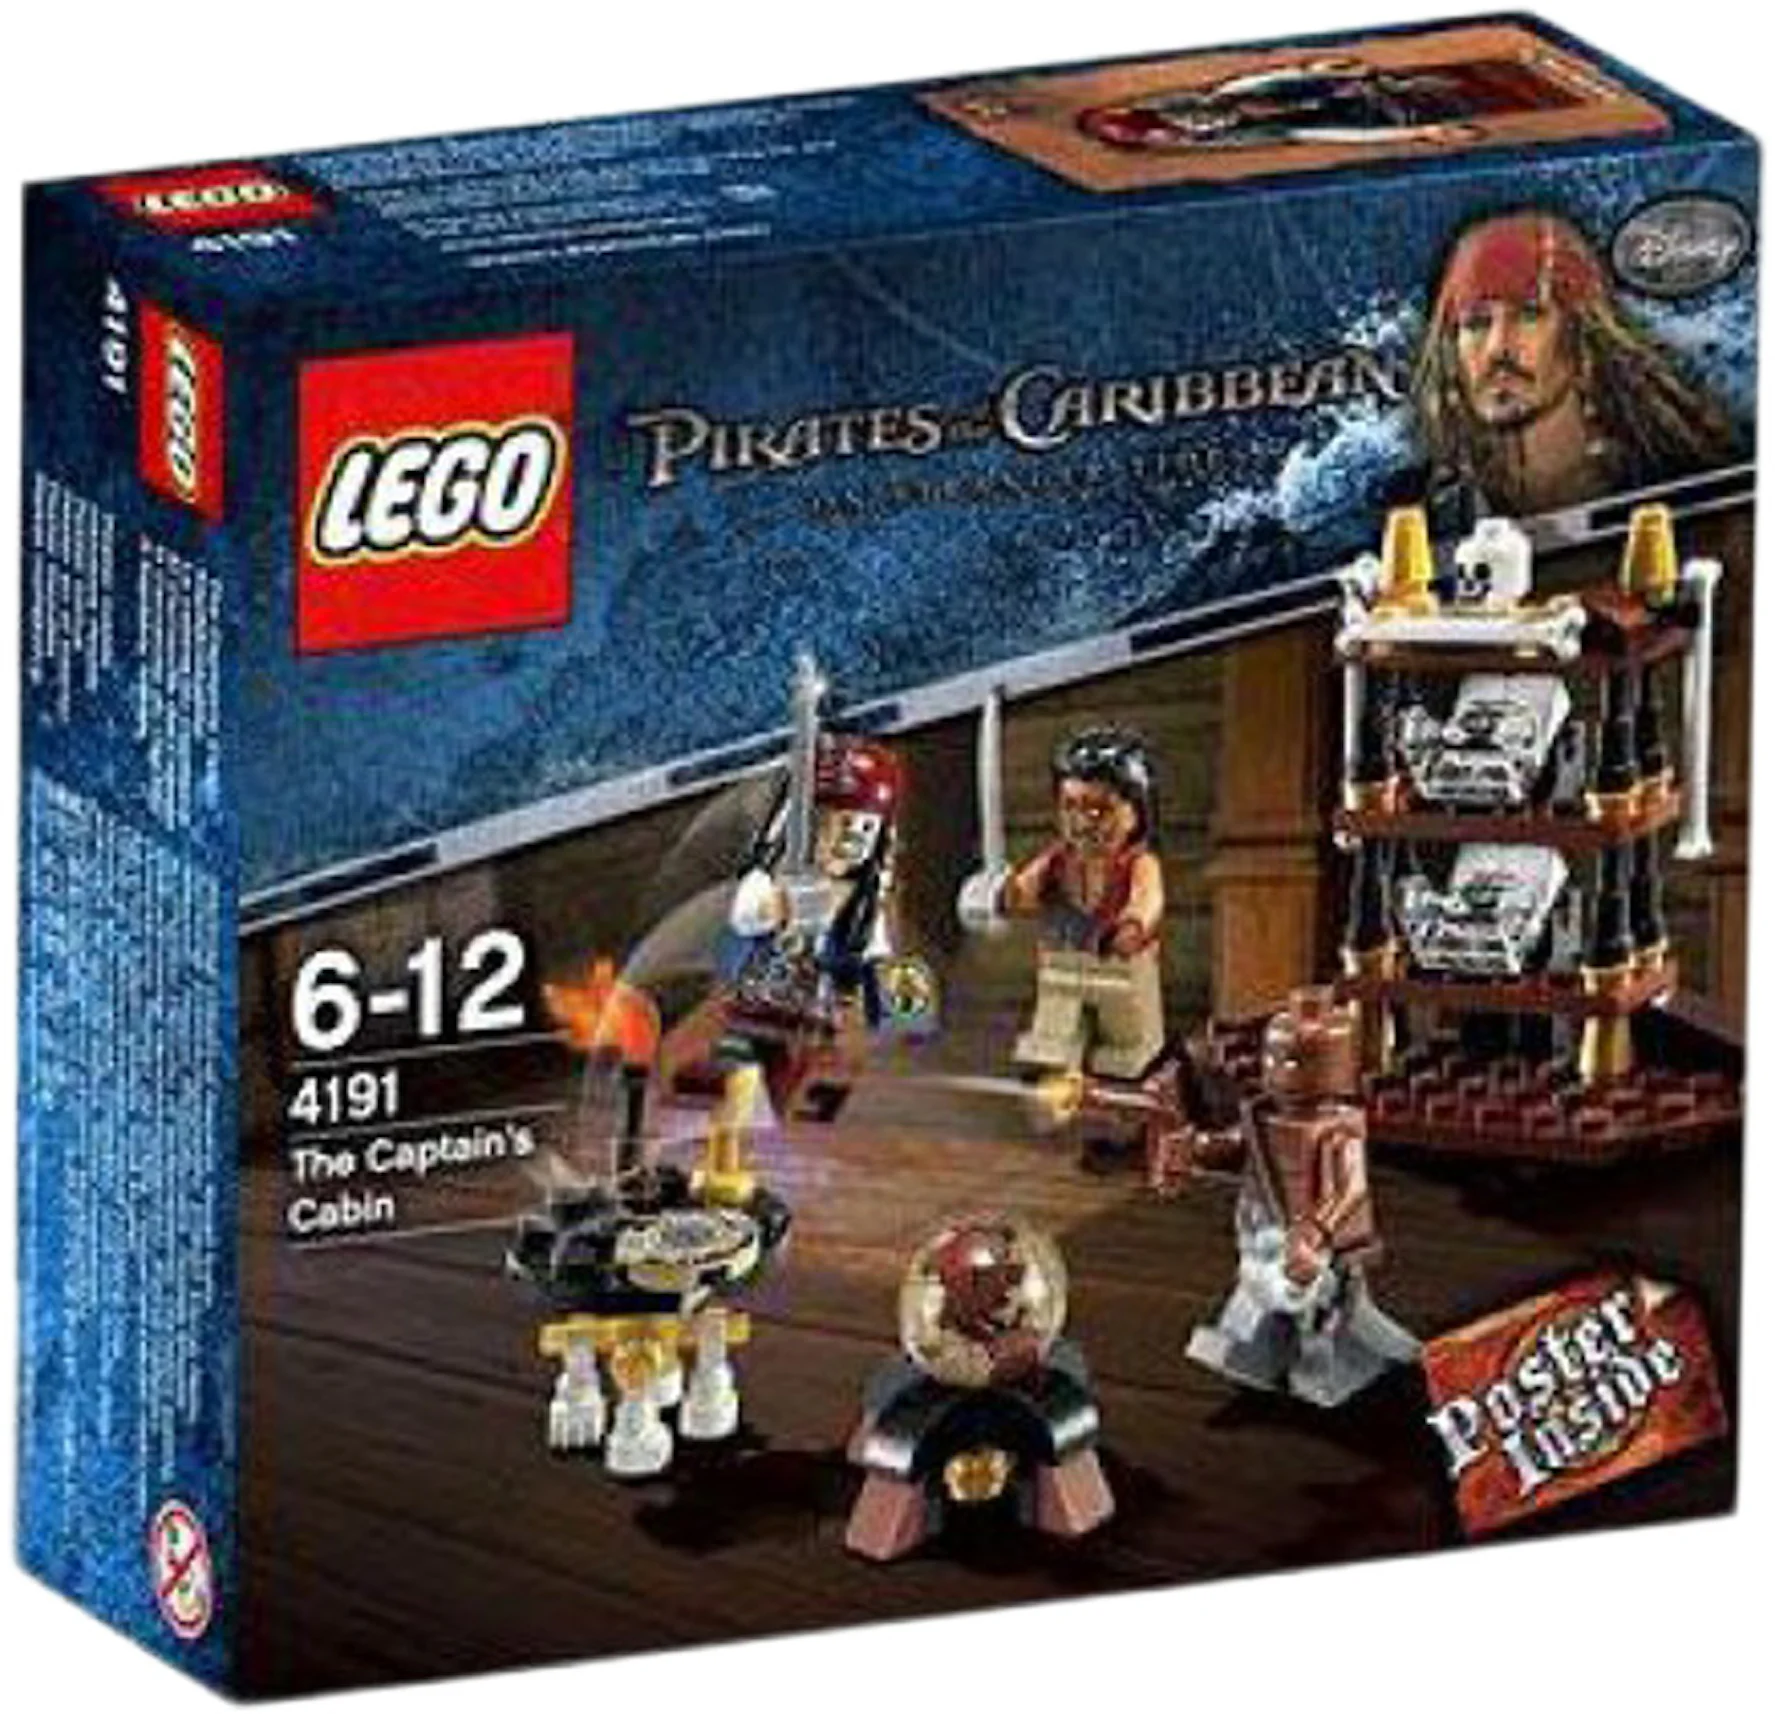 LEGO Pirates of the Caribbean The Captain's Cabin Set 4191 - US